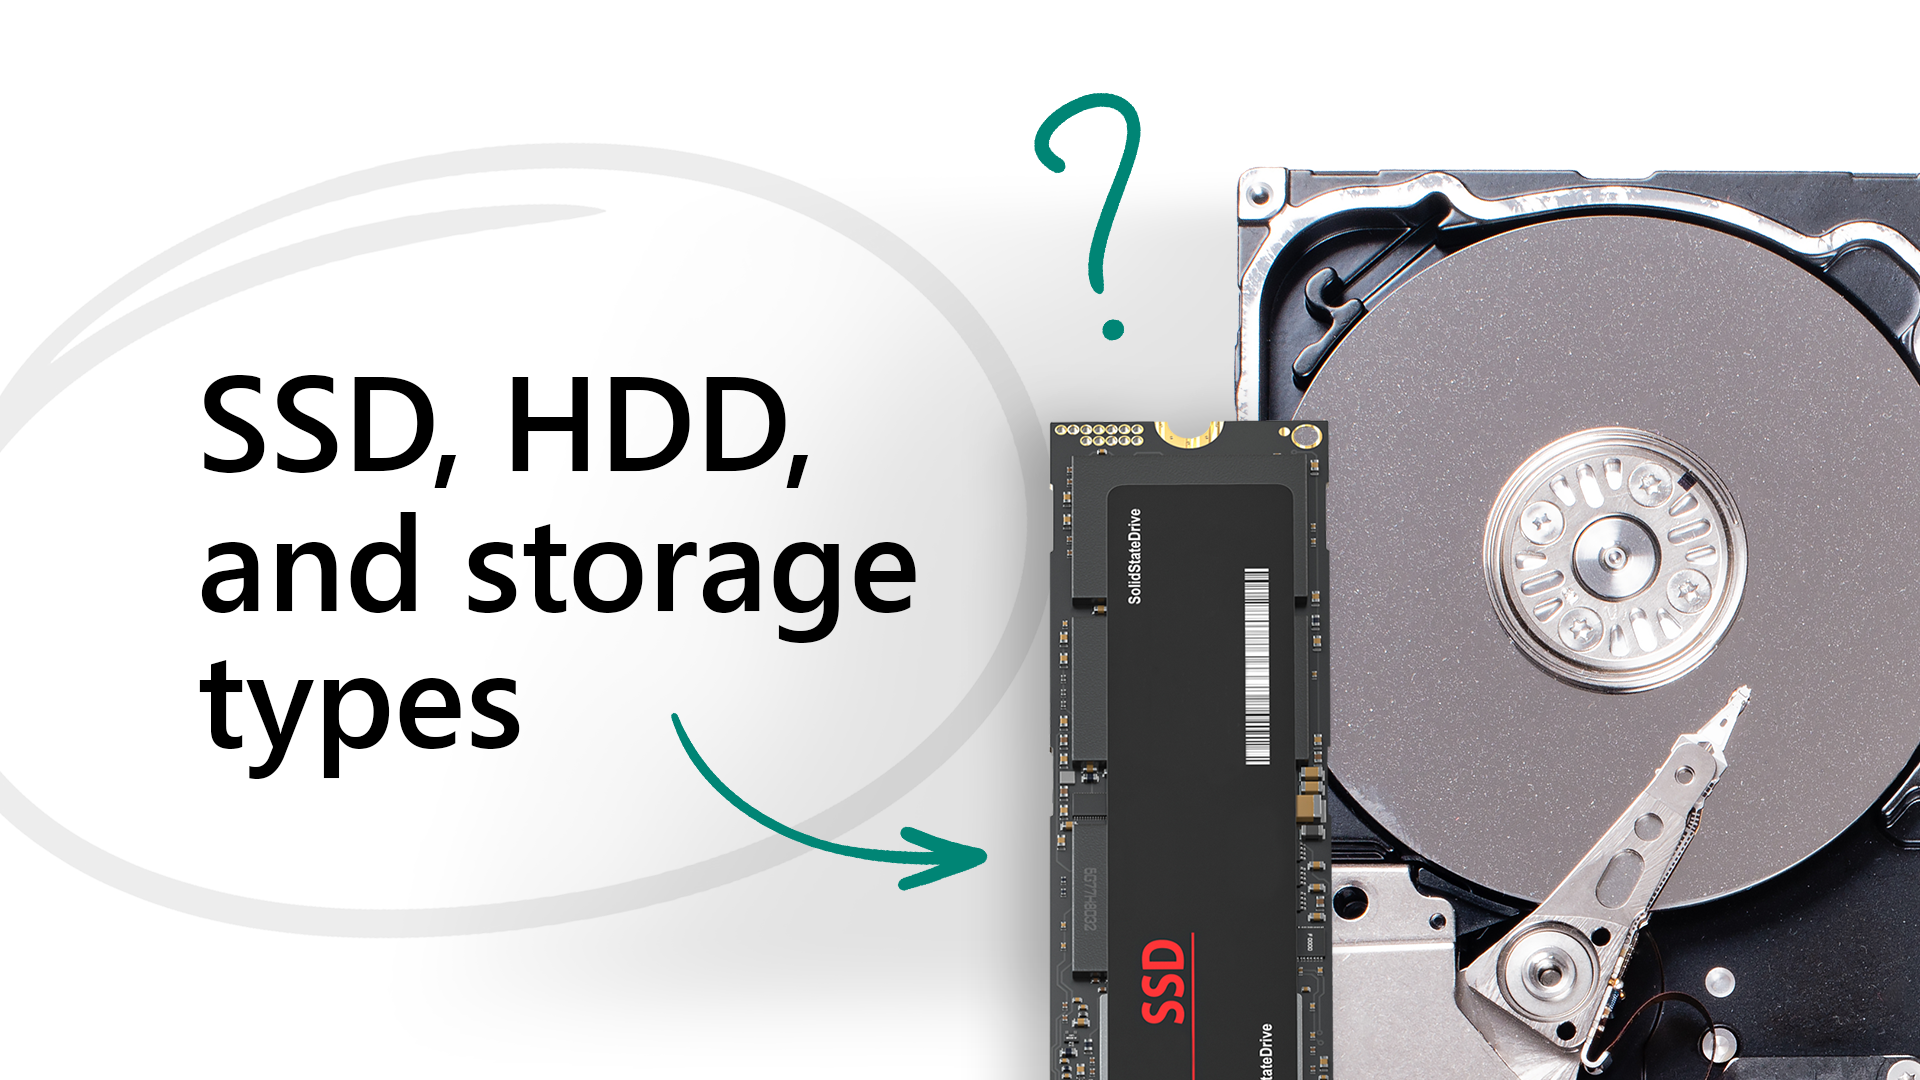 abstraktion udstilling Identificere All about SSD, HDD, and storage types - Microsoft Support